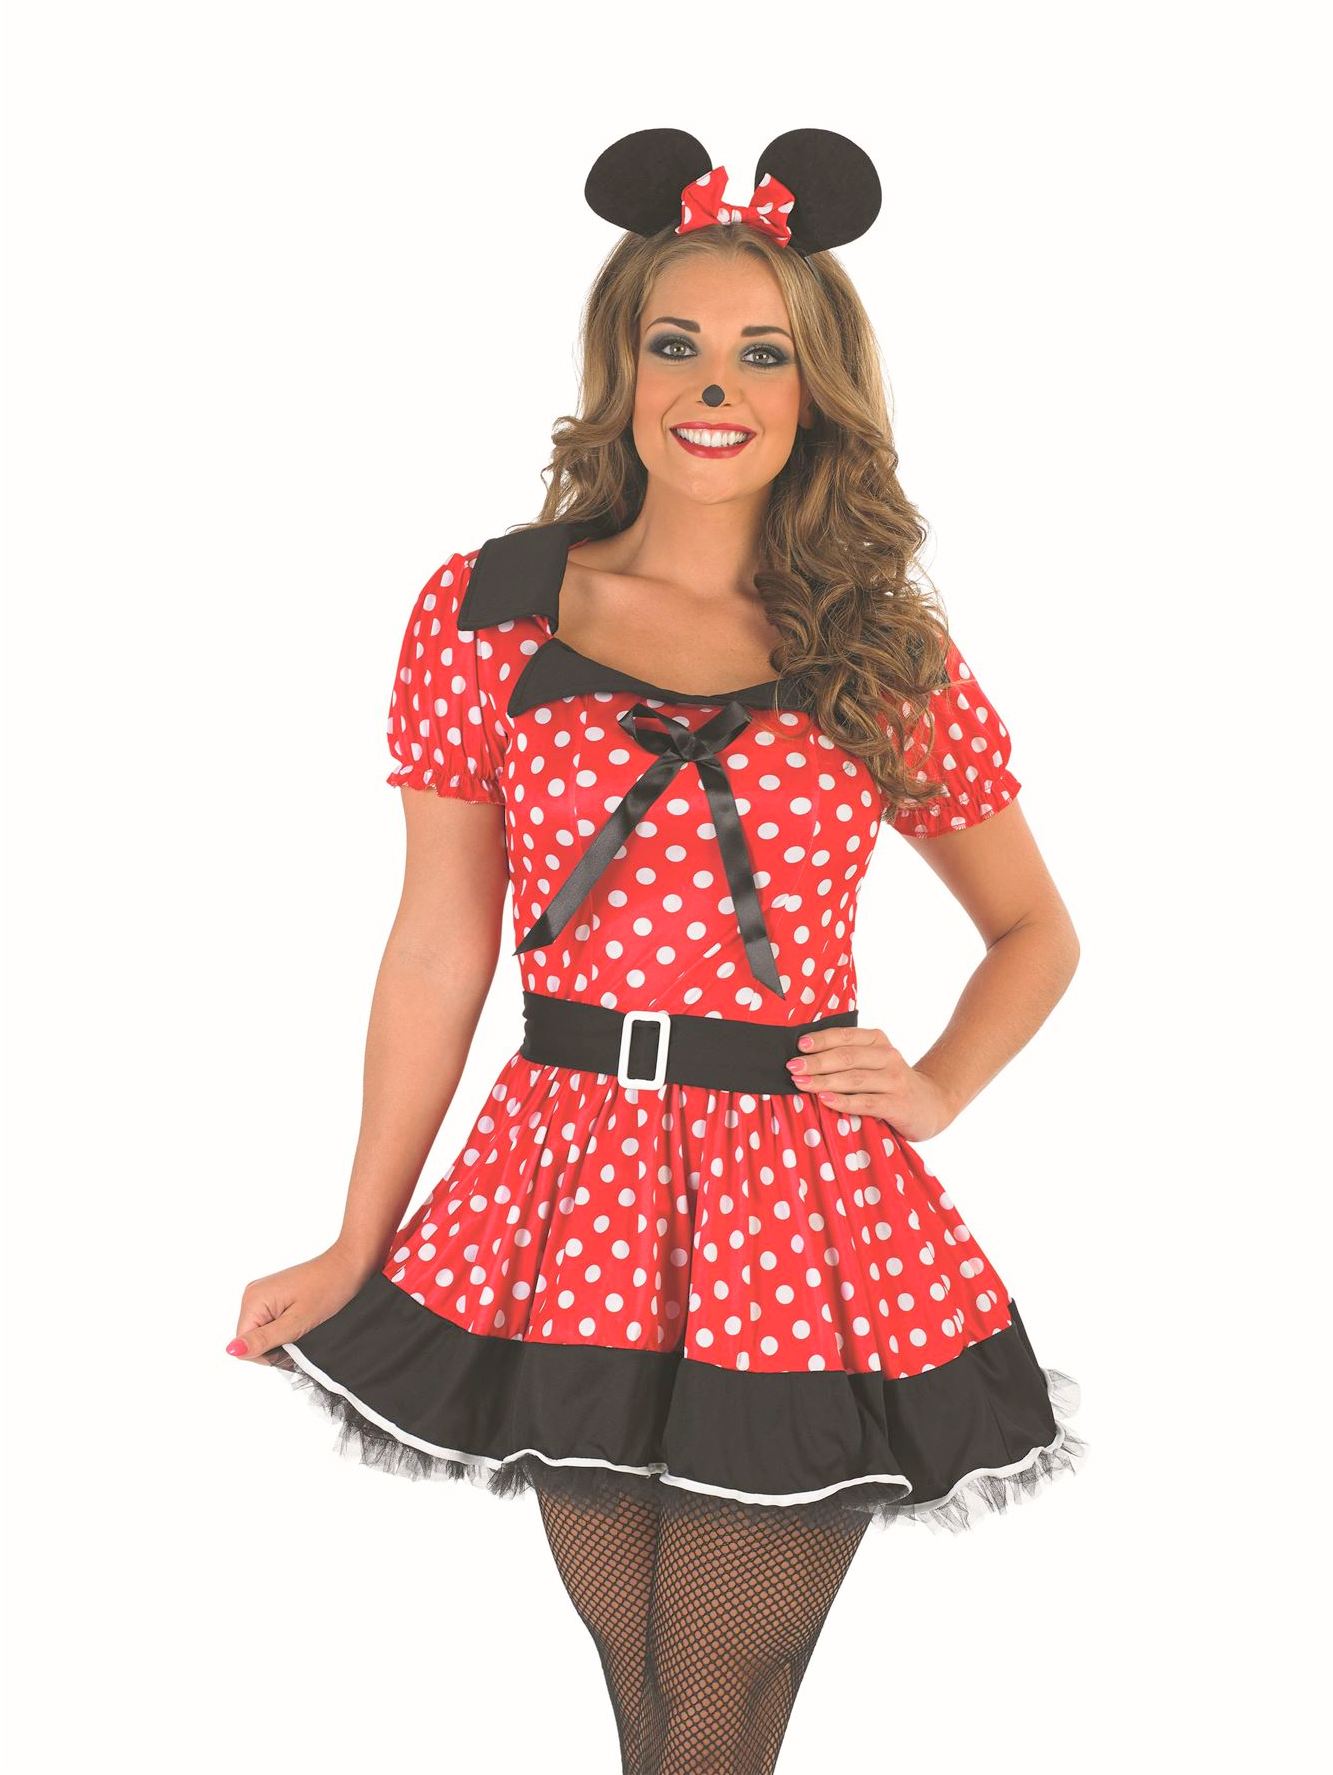 Beautiful Minnie Mouse Dress,Outfit And Costume Image